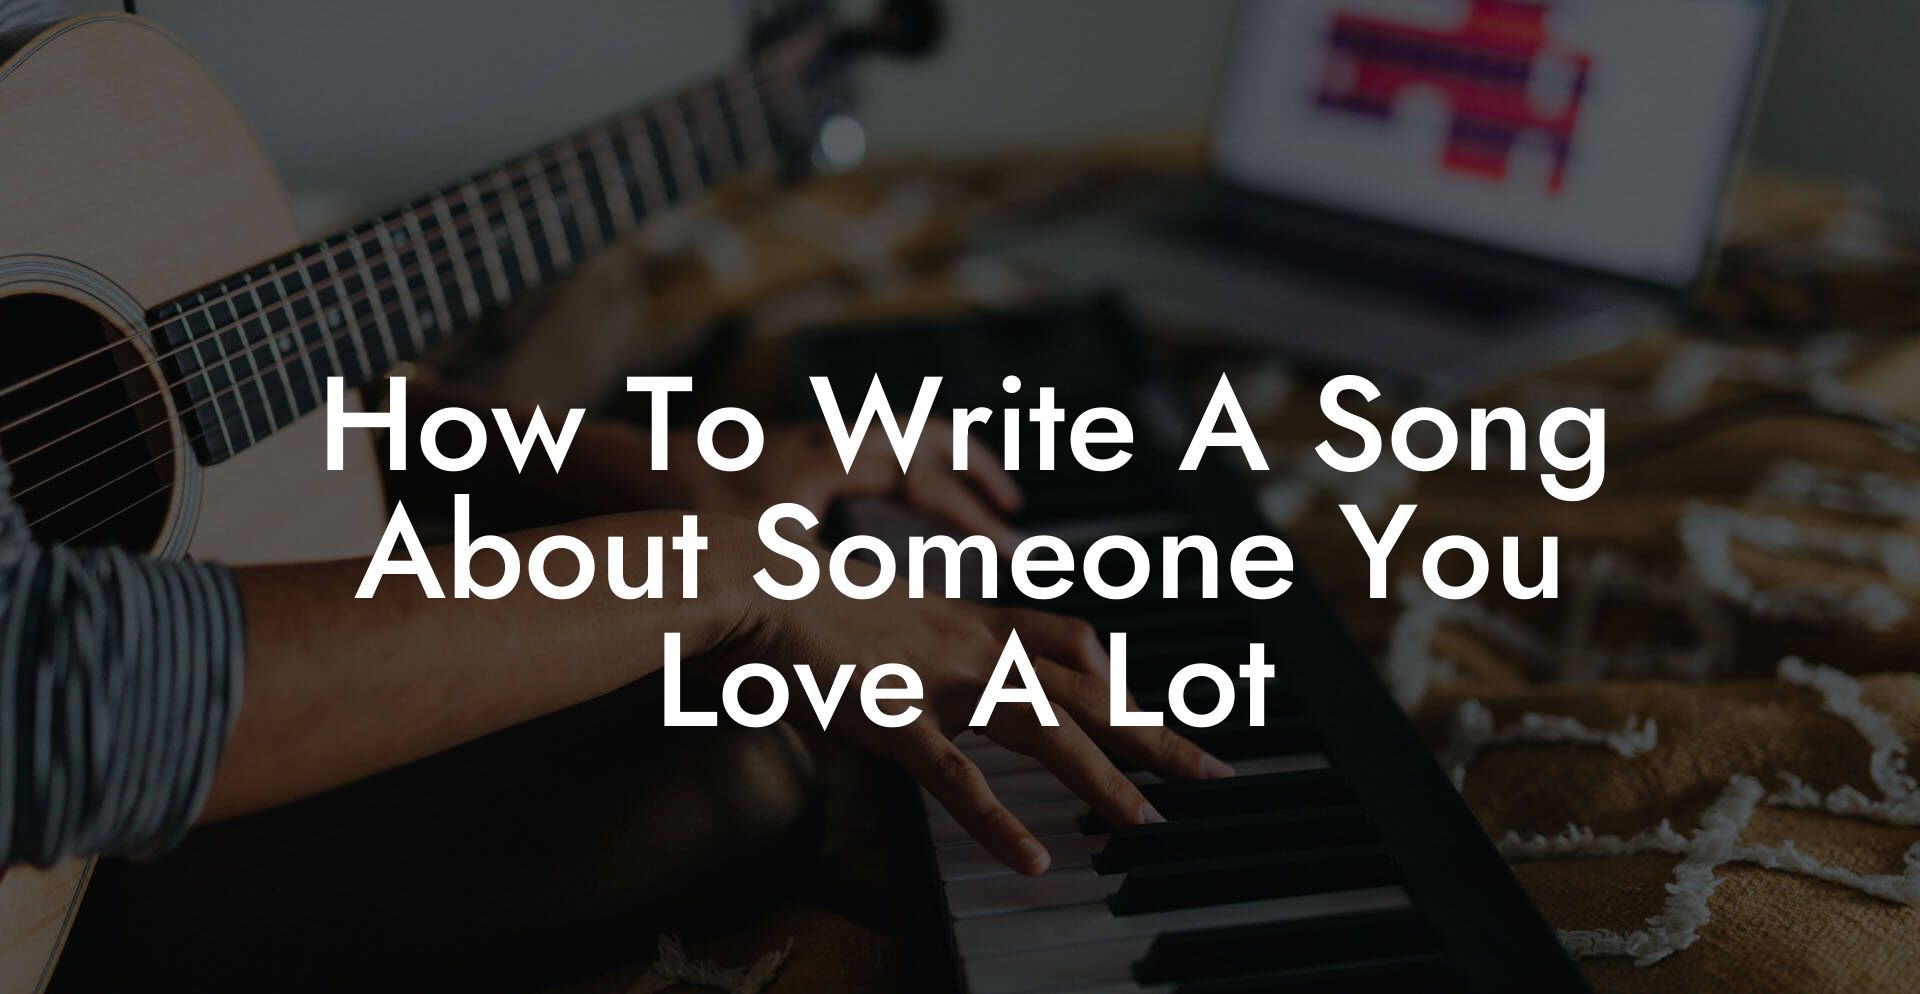 how to write a song about someone you love a lot lyric assistant